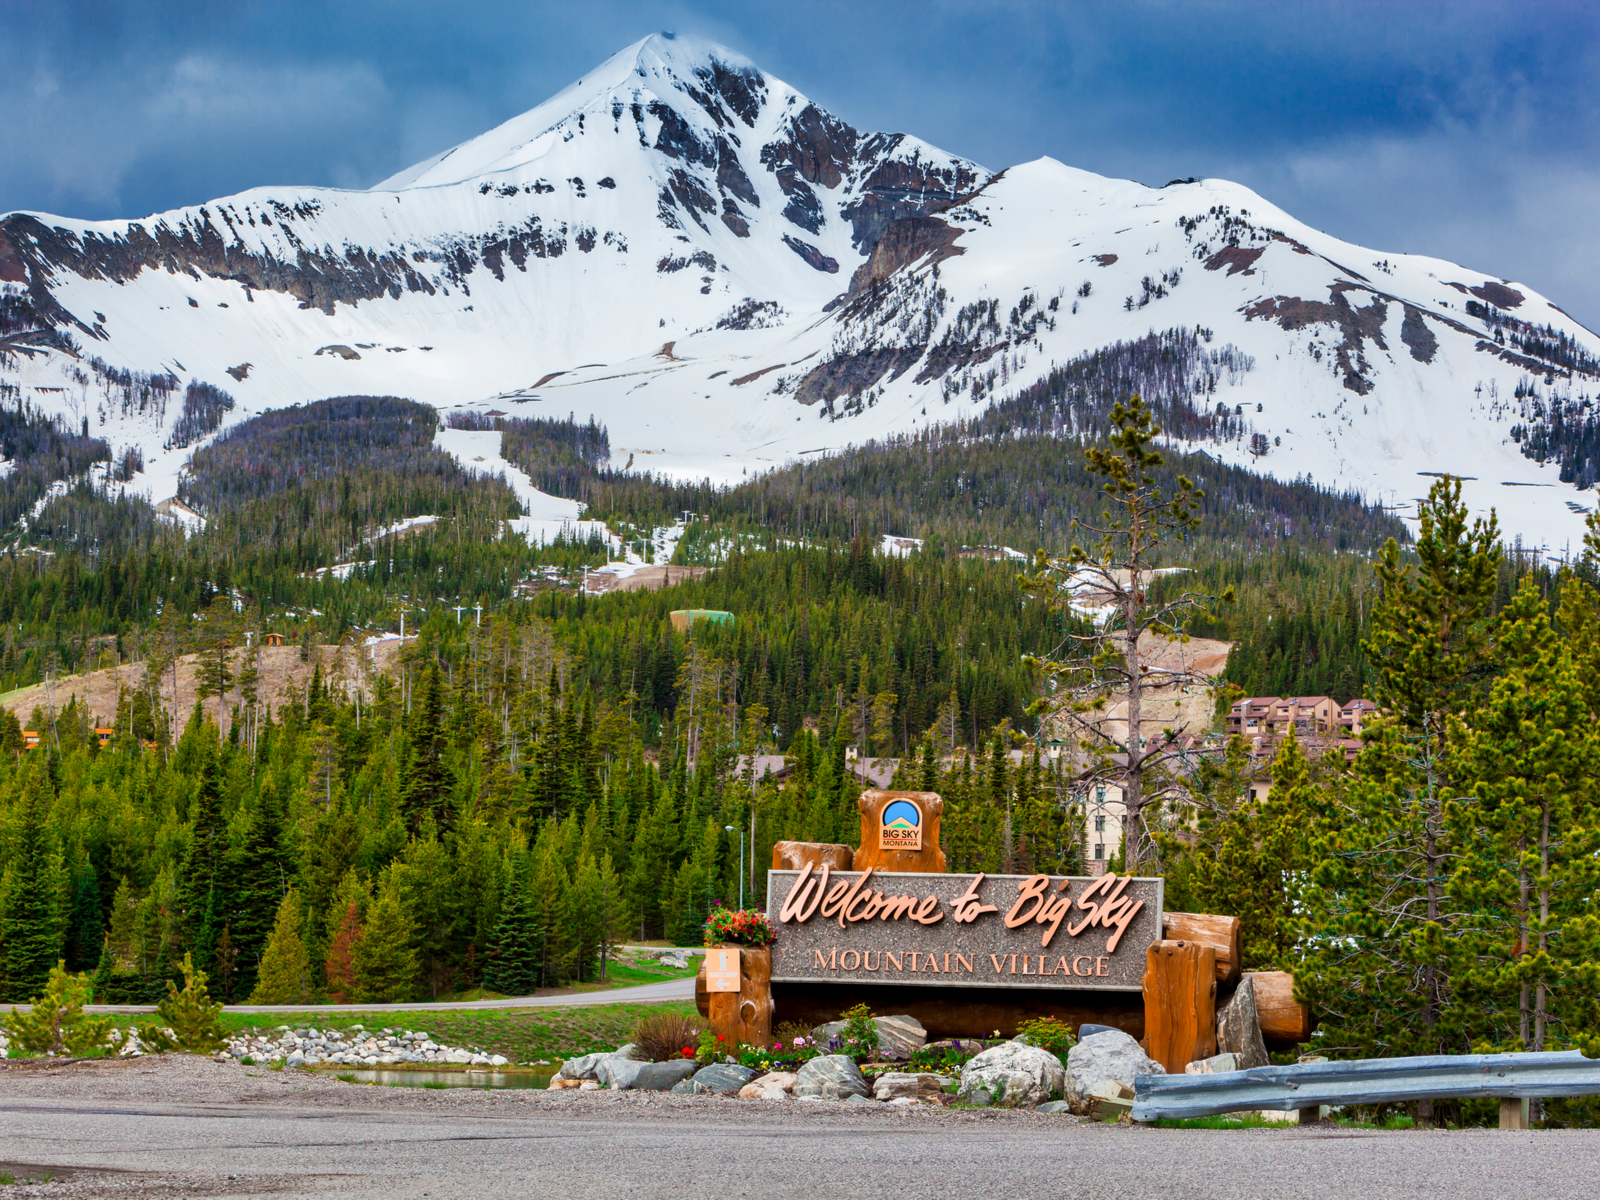 Snow-capped mountain in one of the best places to visit in Montana, Big Sky Resort